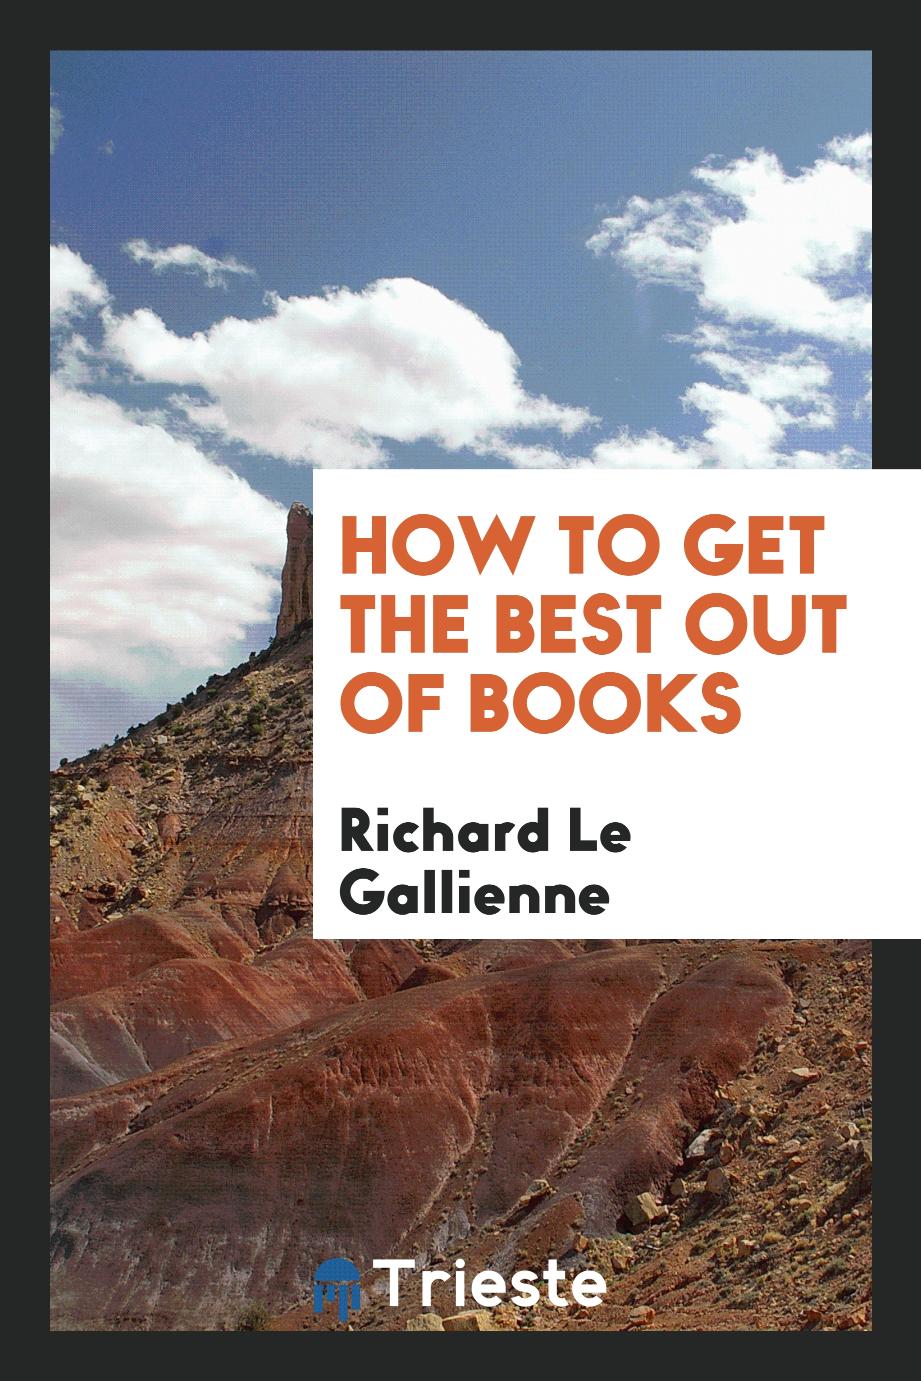 How to get the best out of books